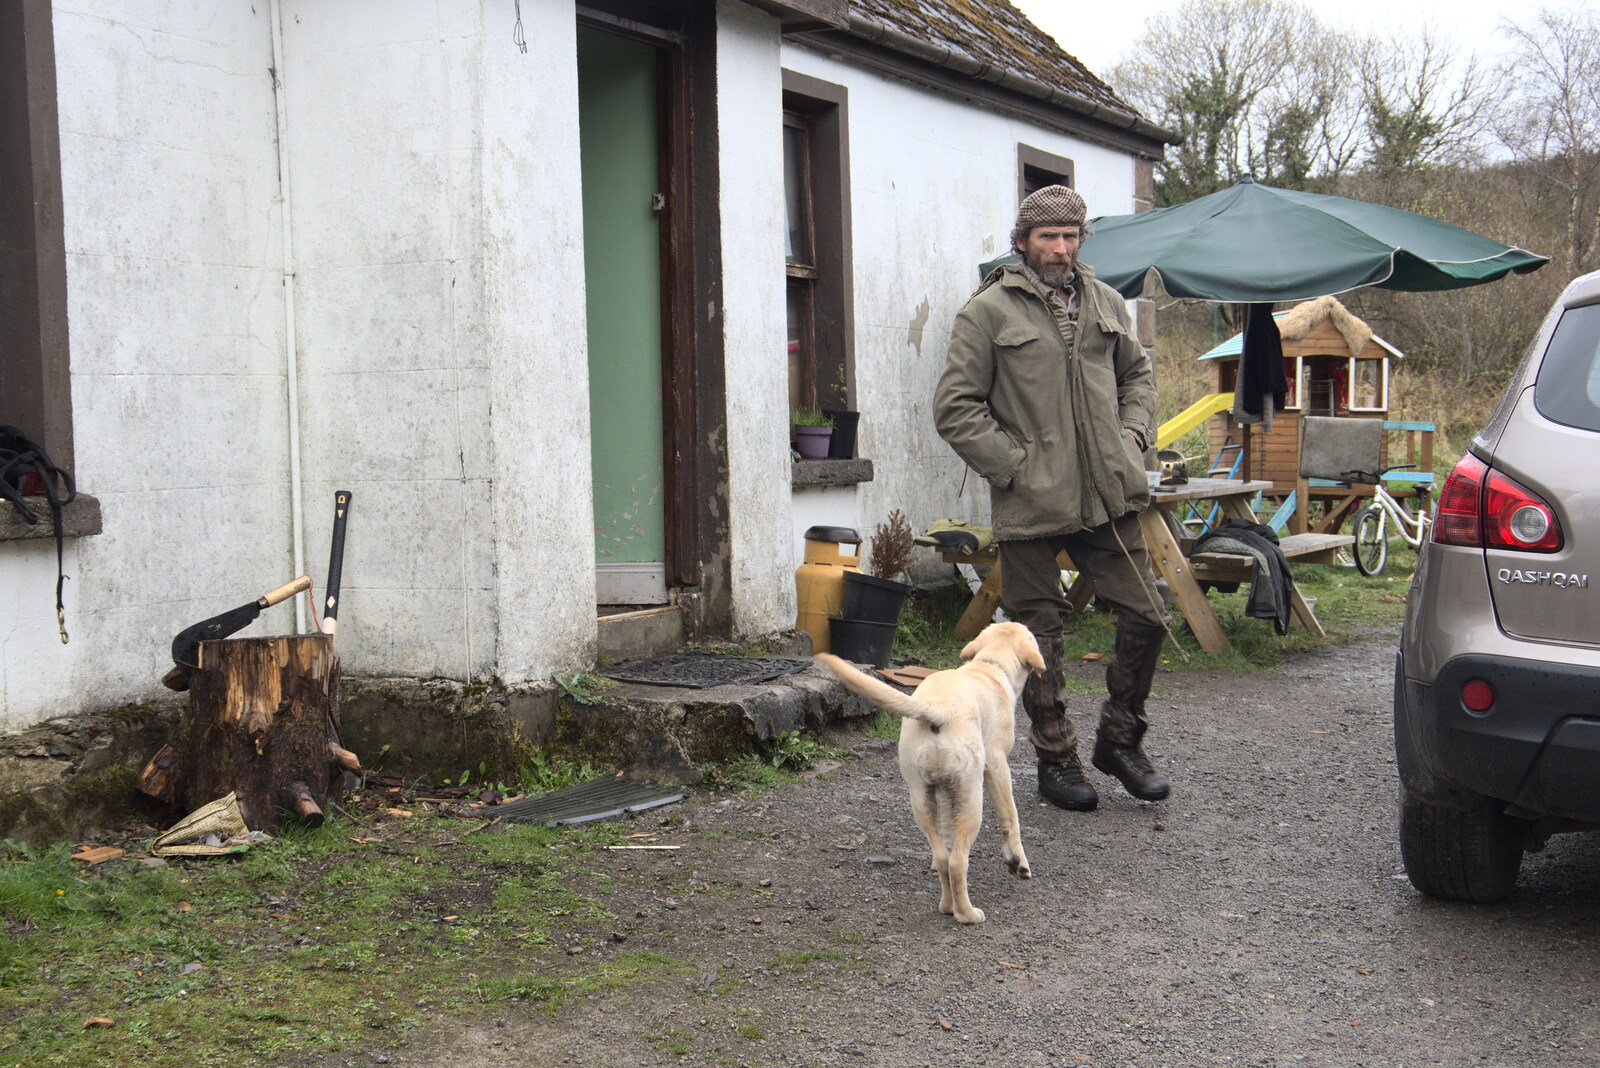 Philly heads out to walk the dog from Manorhamilton and Bundoran, Leitrim and Donegal, Ireland - 16th April 2022